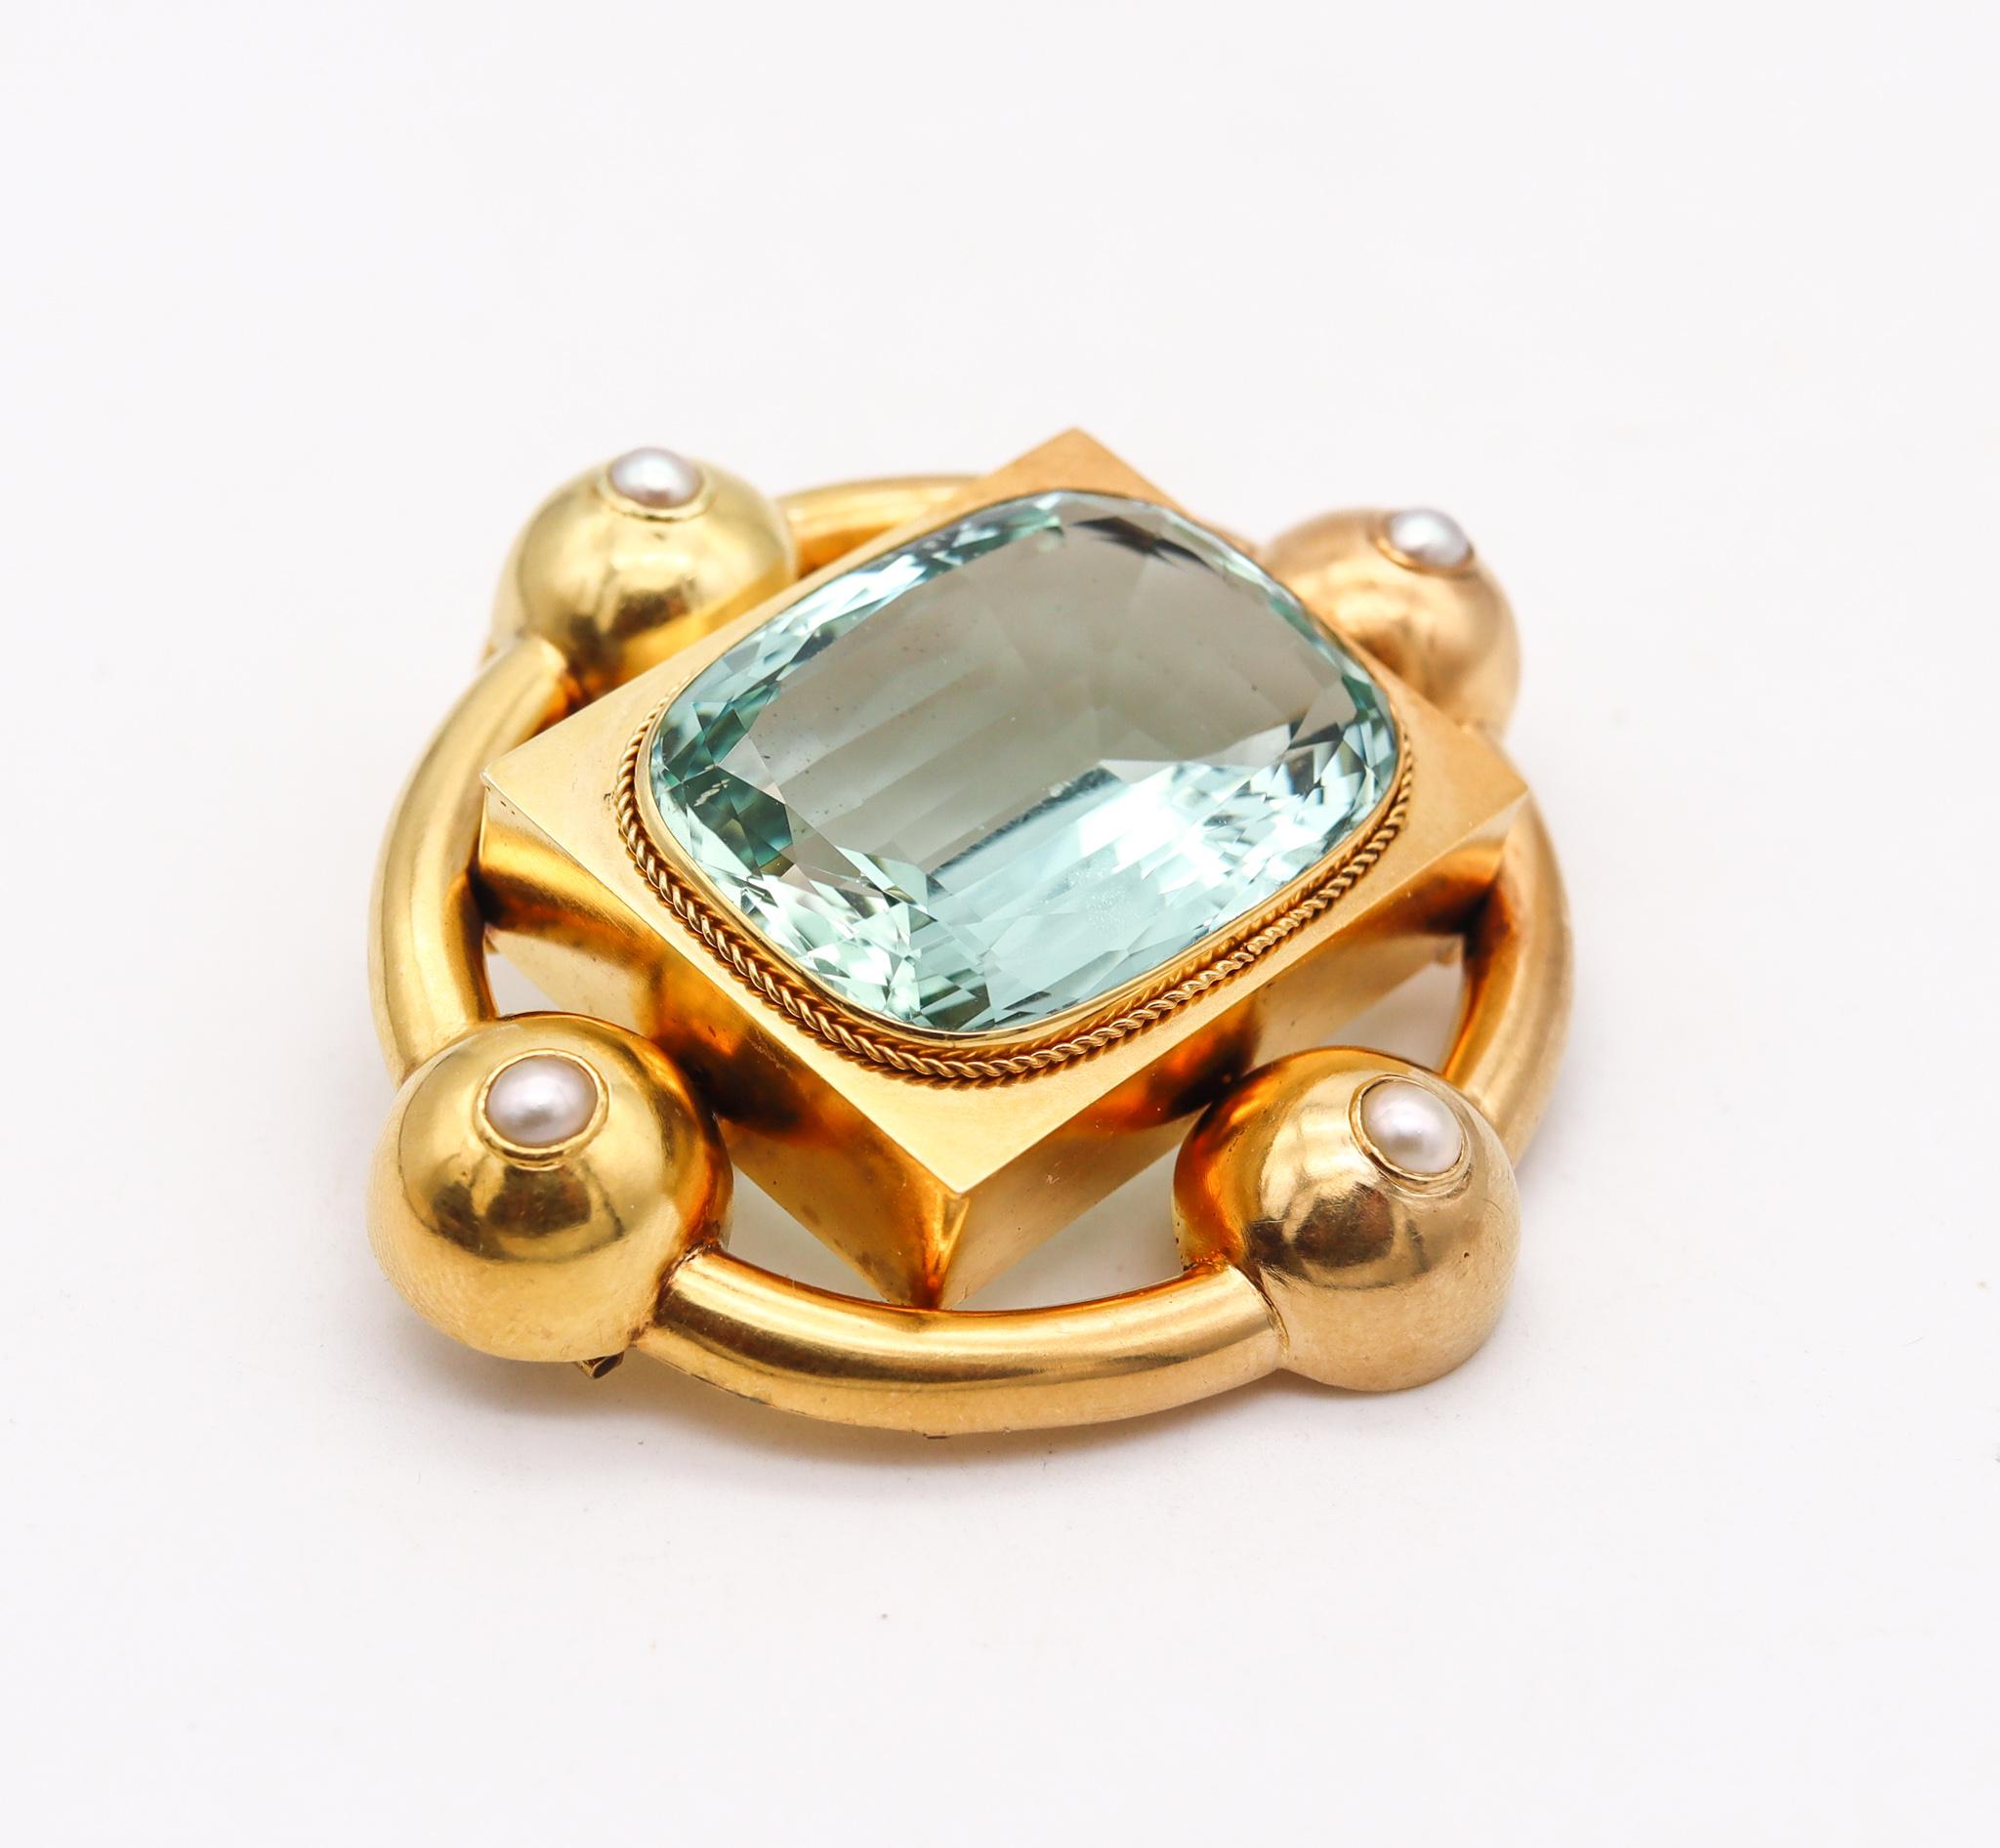 Convertible pendant-brooch with aquamarine.

An oversized statement piece, created in England in the last three quarter of the 19th century, circa 1880's. This beautiful aesthetic sleek convertible pendant-brooch has been crafted during the